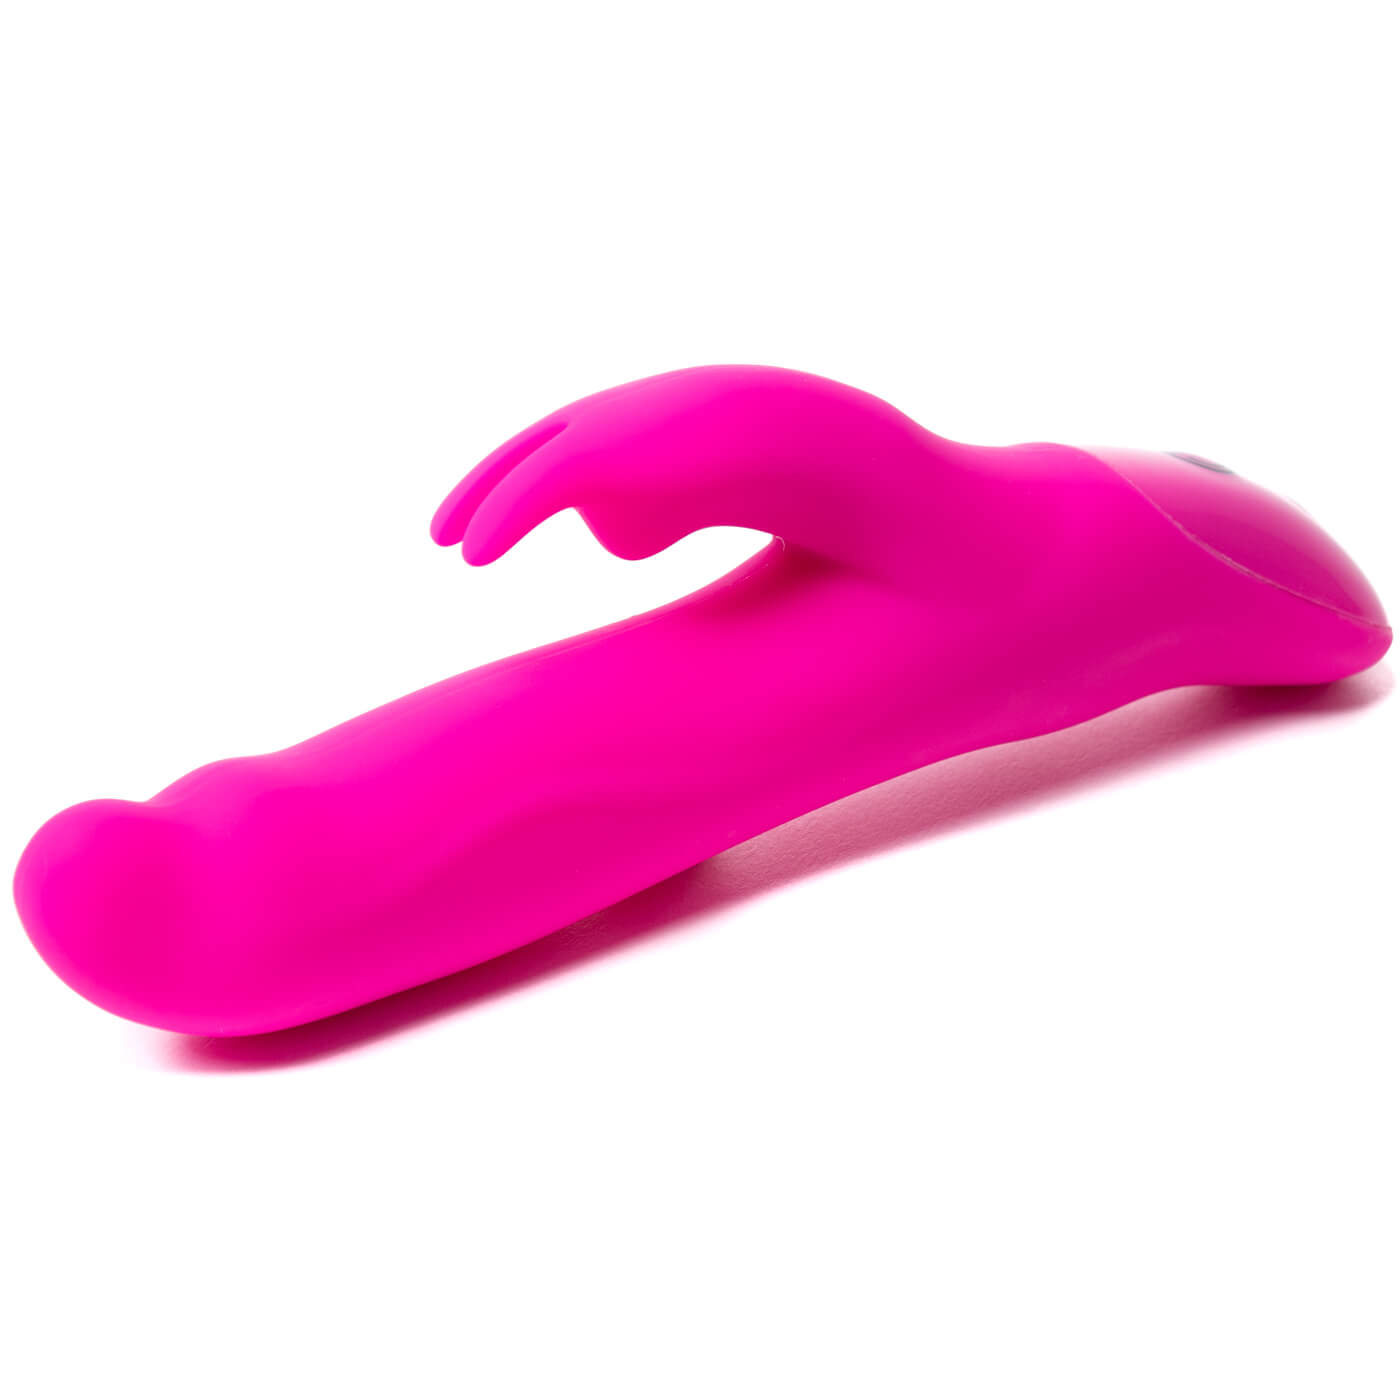 DUALITY Dual Motor 7 Mode Rechargeable Thick Powerful Rabbit Vibrator